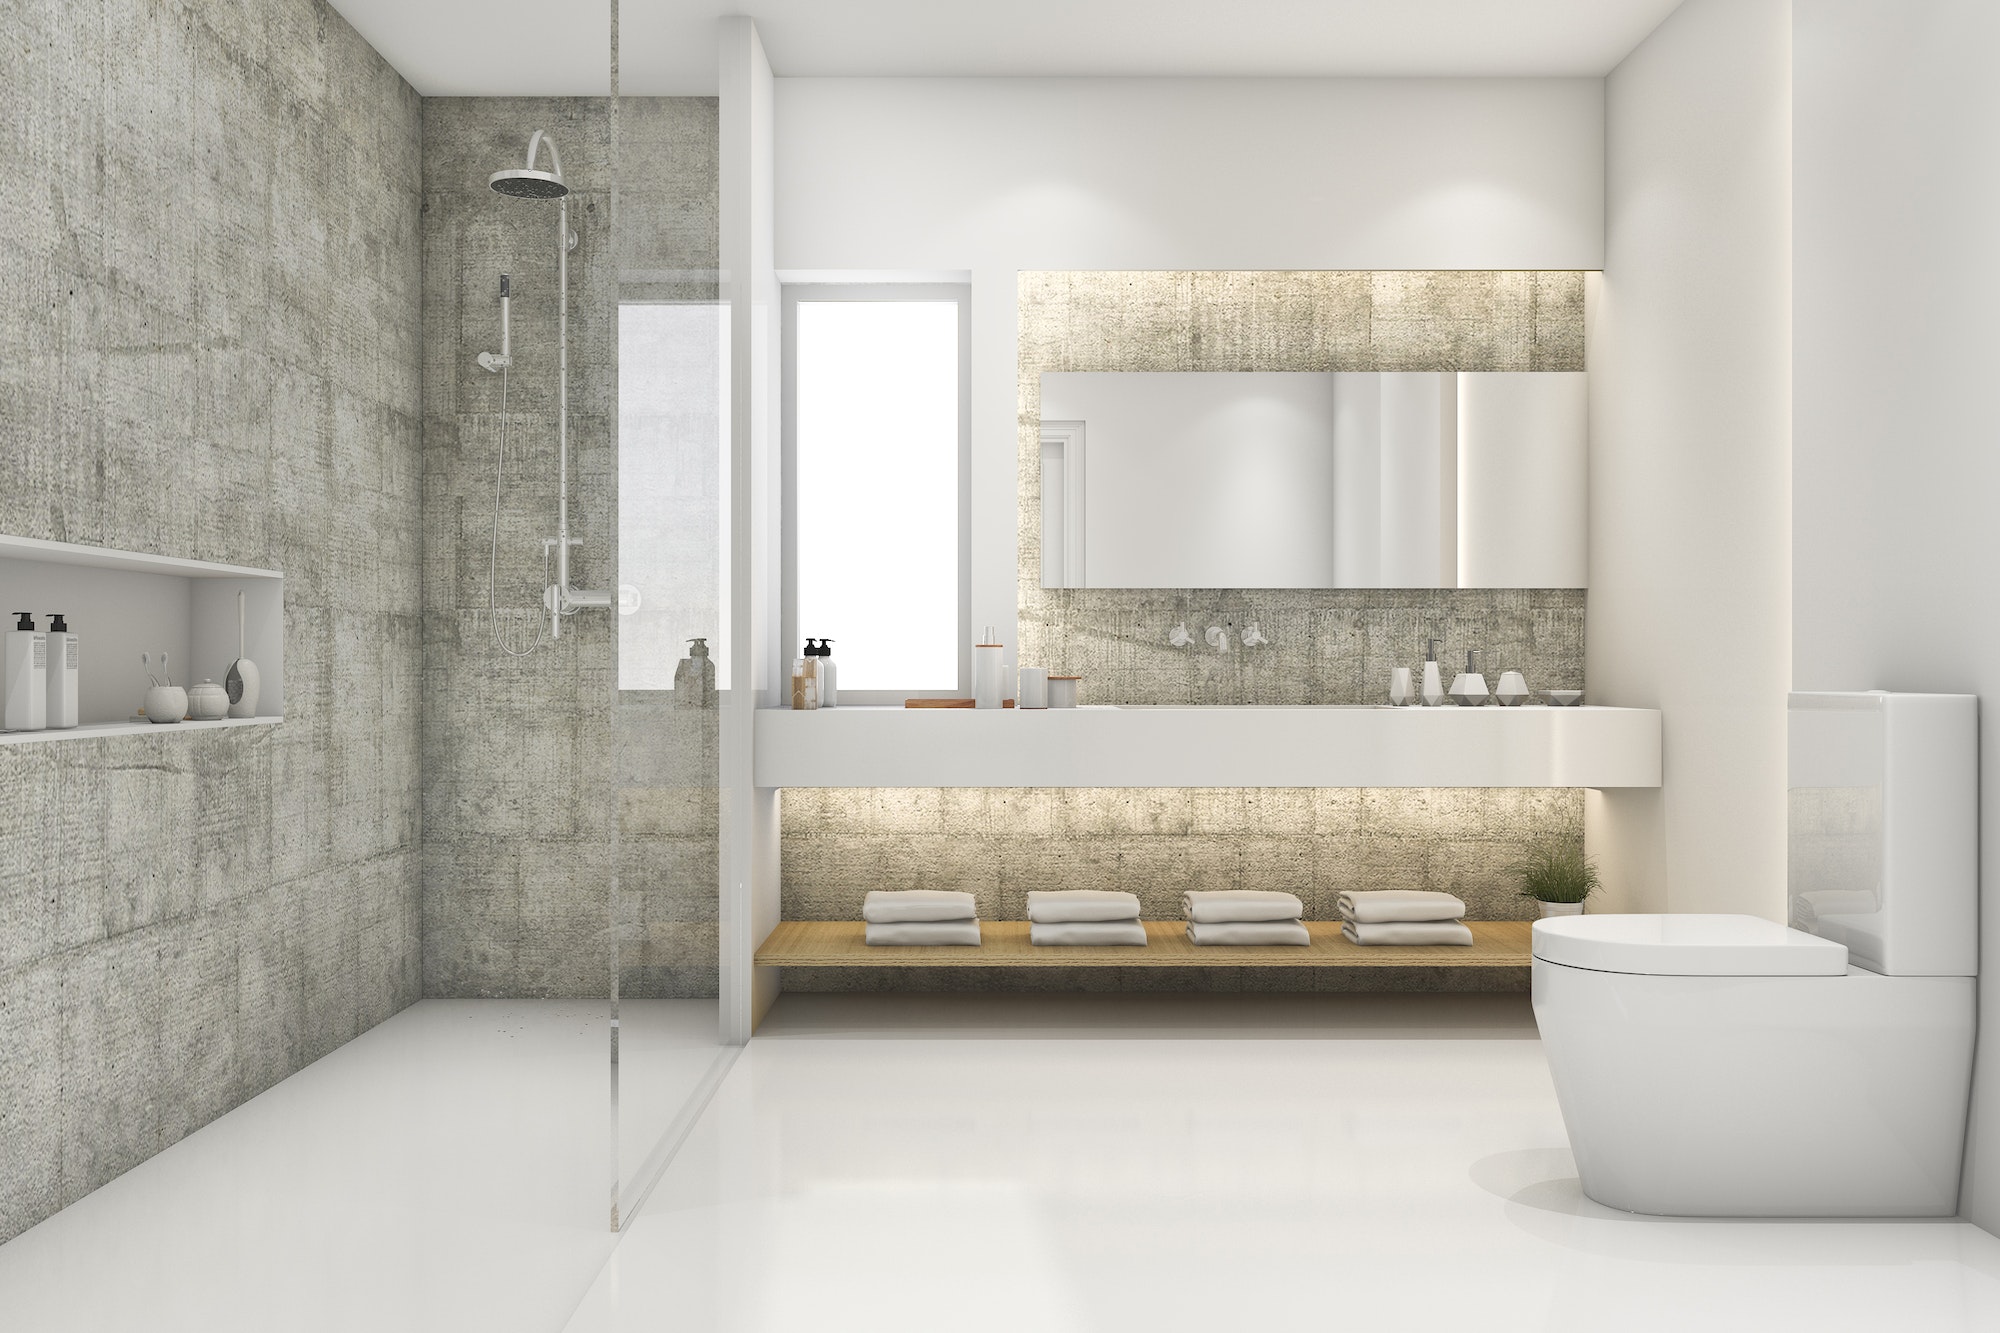 5 Luxurious Modern Bathroom Ideas with Touches of Gold